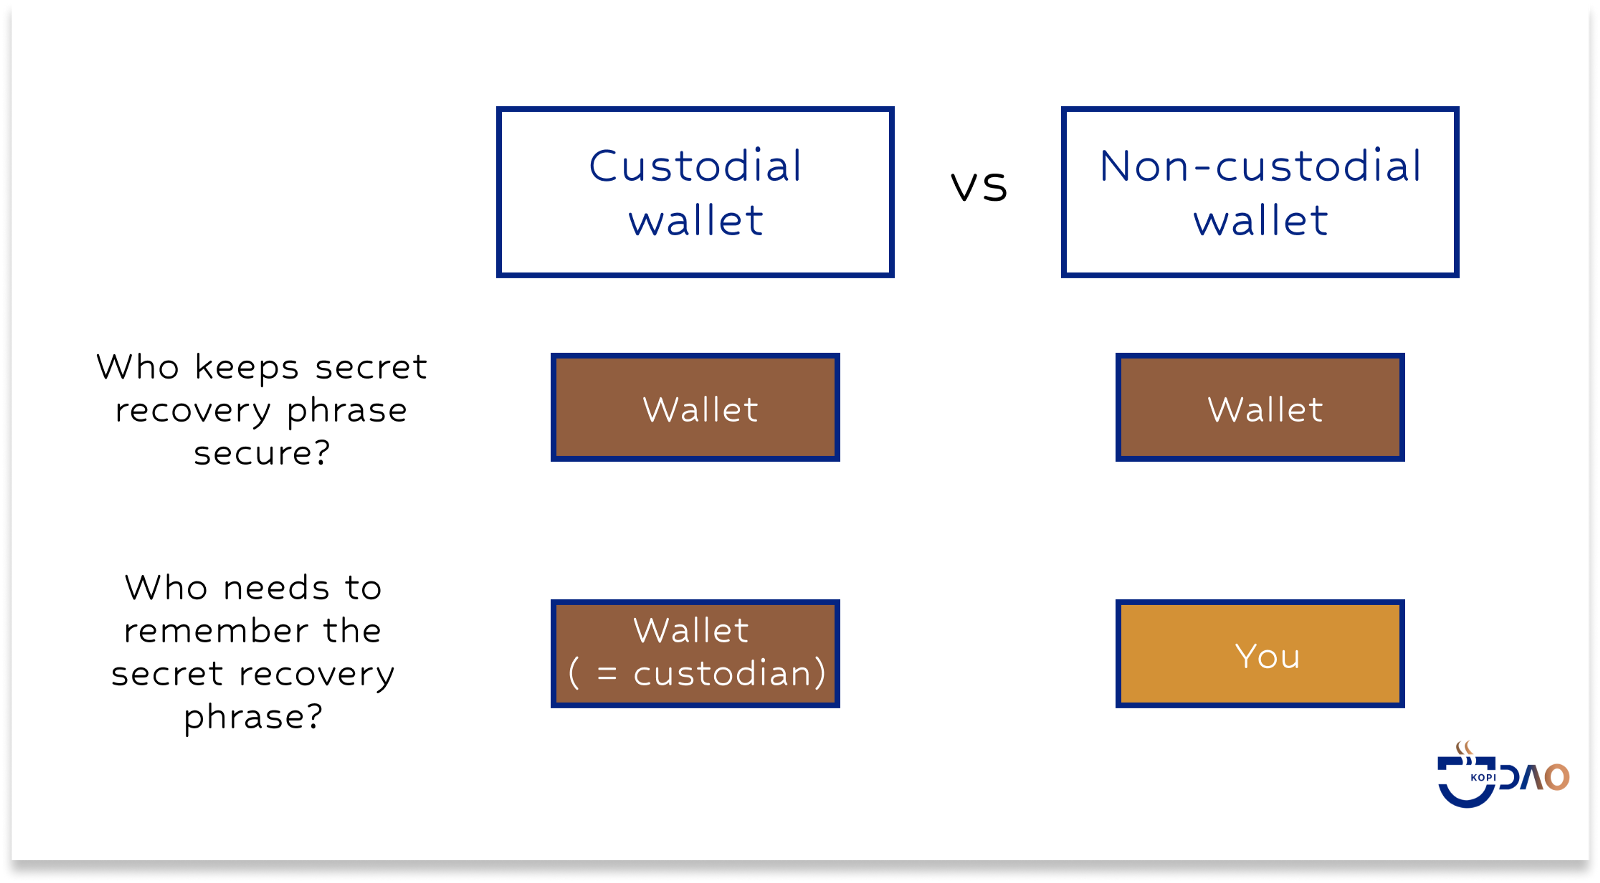 A wallet will always keep your secret recovery phrase secure, but it depends on the type, custodial or non-custodial, who needs to remember the phrase in case you lose access to your wallet (for whatever reason).